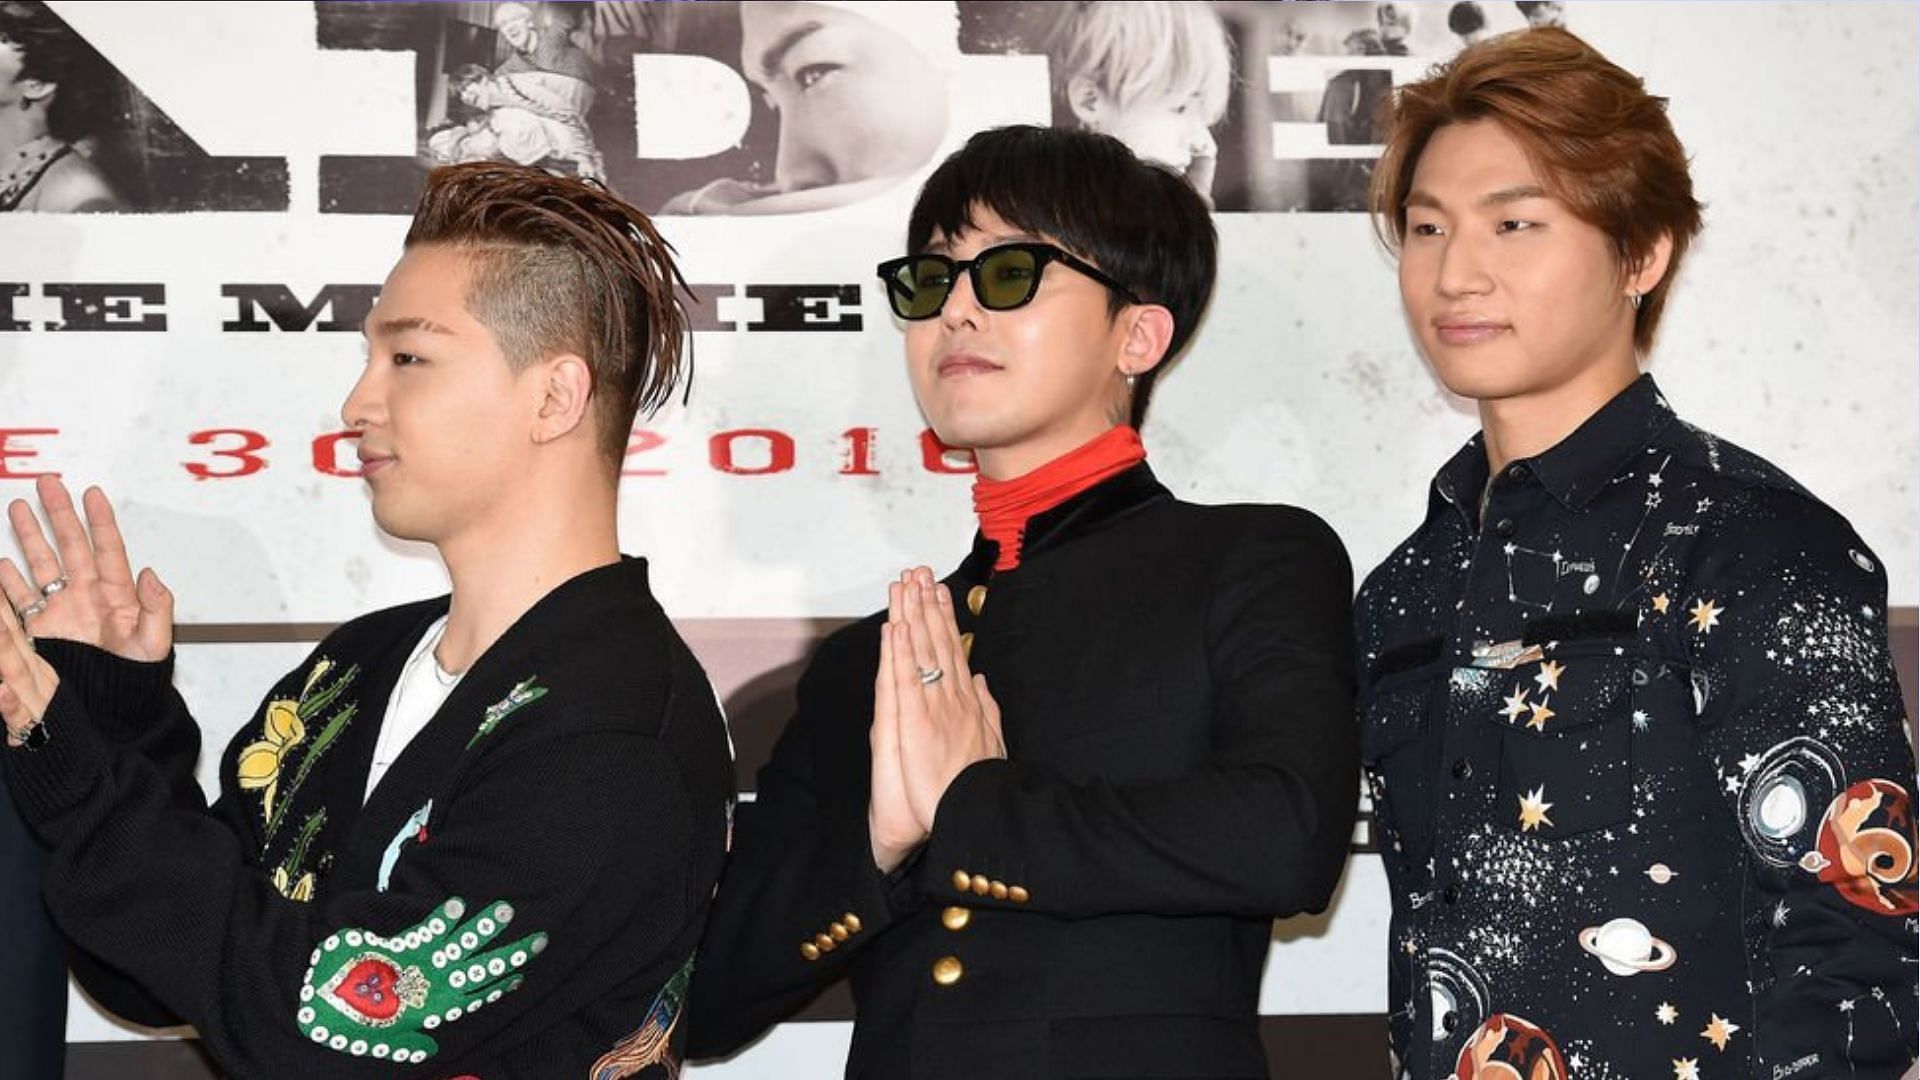 BIGBANG members Taeyang and Daesung leave agency, G-Dragon working on solo contract (Image via OSEN))